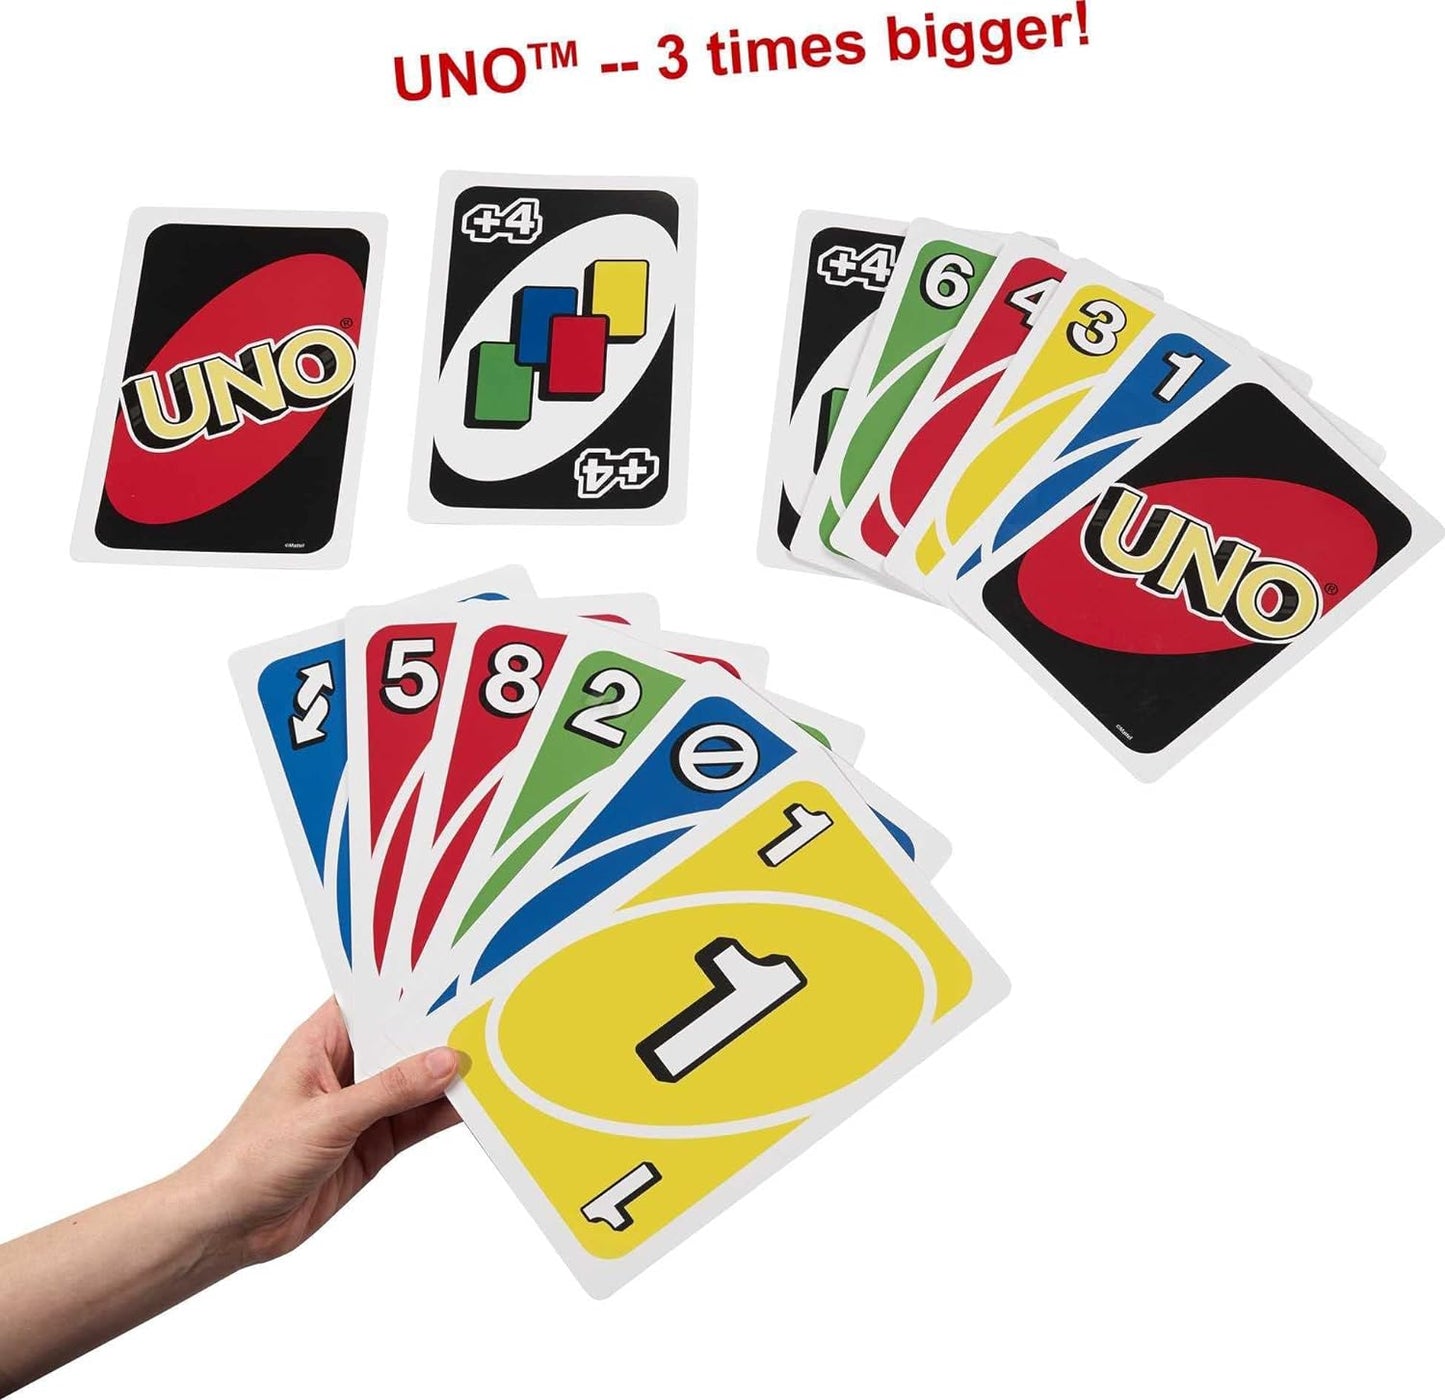 Large Uno Playing Cards showing different cards. Get ready to super-size your UNO experience with the Mattel Games Giant UNO Card Game! It's not just a game; it's a colossal adventure for kids, adults, and the whole family, including gamers with low vision.